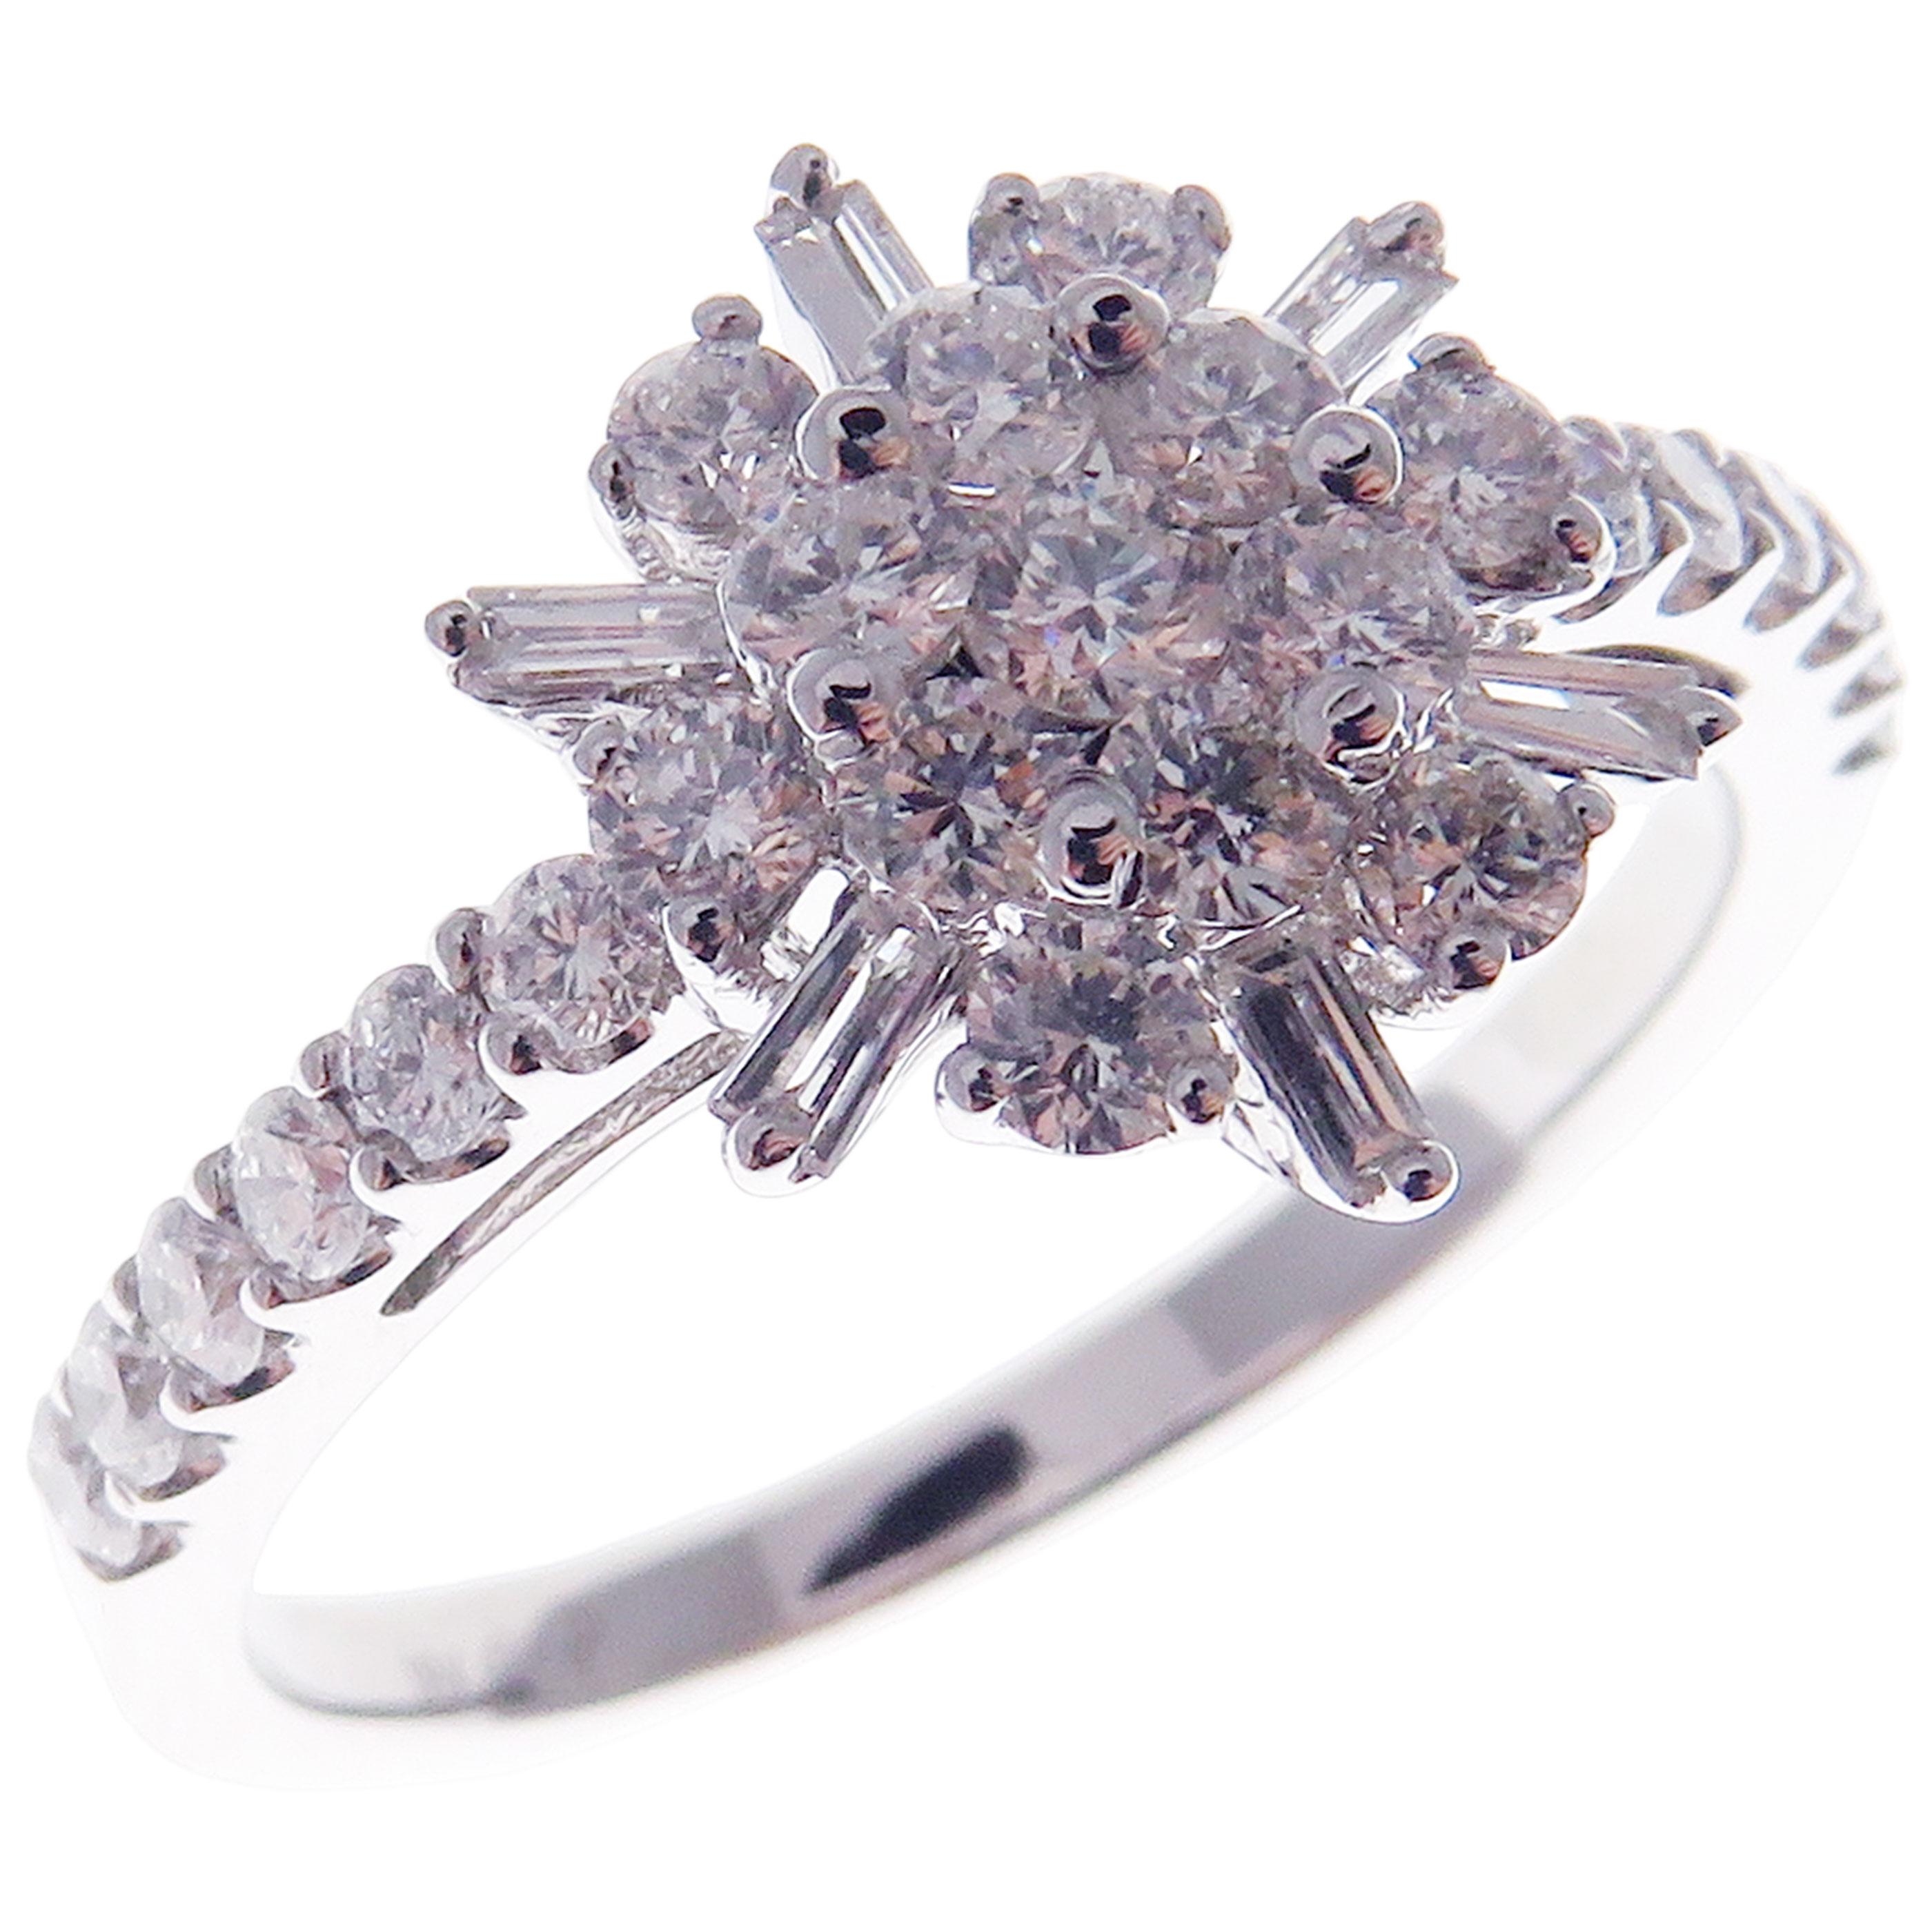 This trendy cluster snowflake inspired ring is crafted in 18-karat white gold, featuring 25 round white diamonds totaling of 0.83 carats and 6 baguette white diamonds totaling of 0.09 carats.
Approximate total weight 2.97 grams.
Standard Ring size